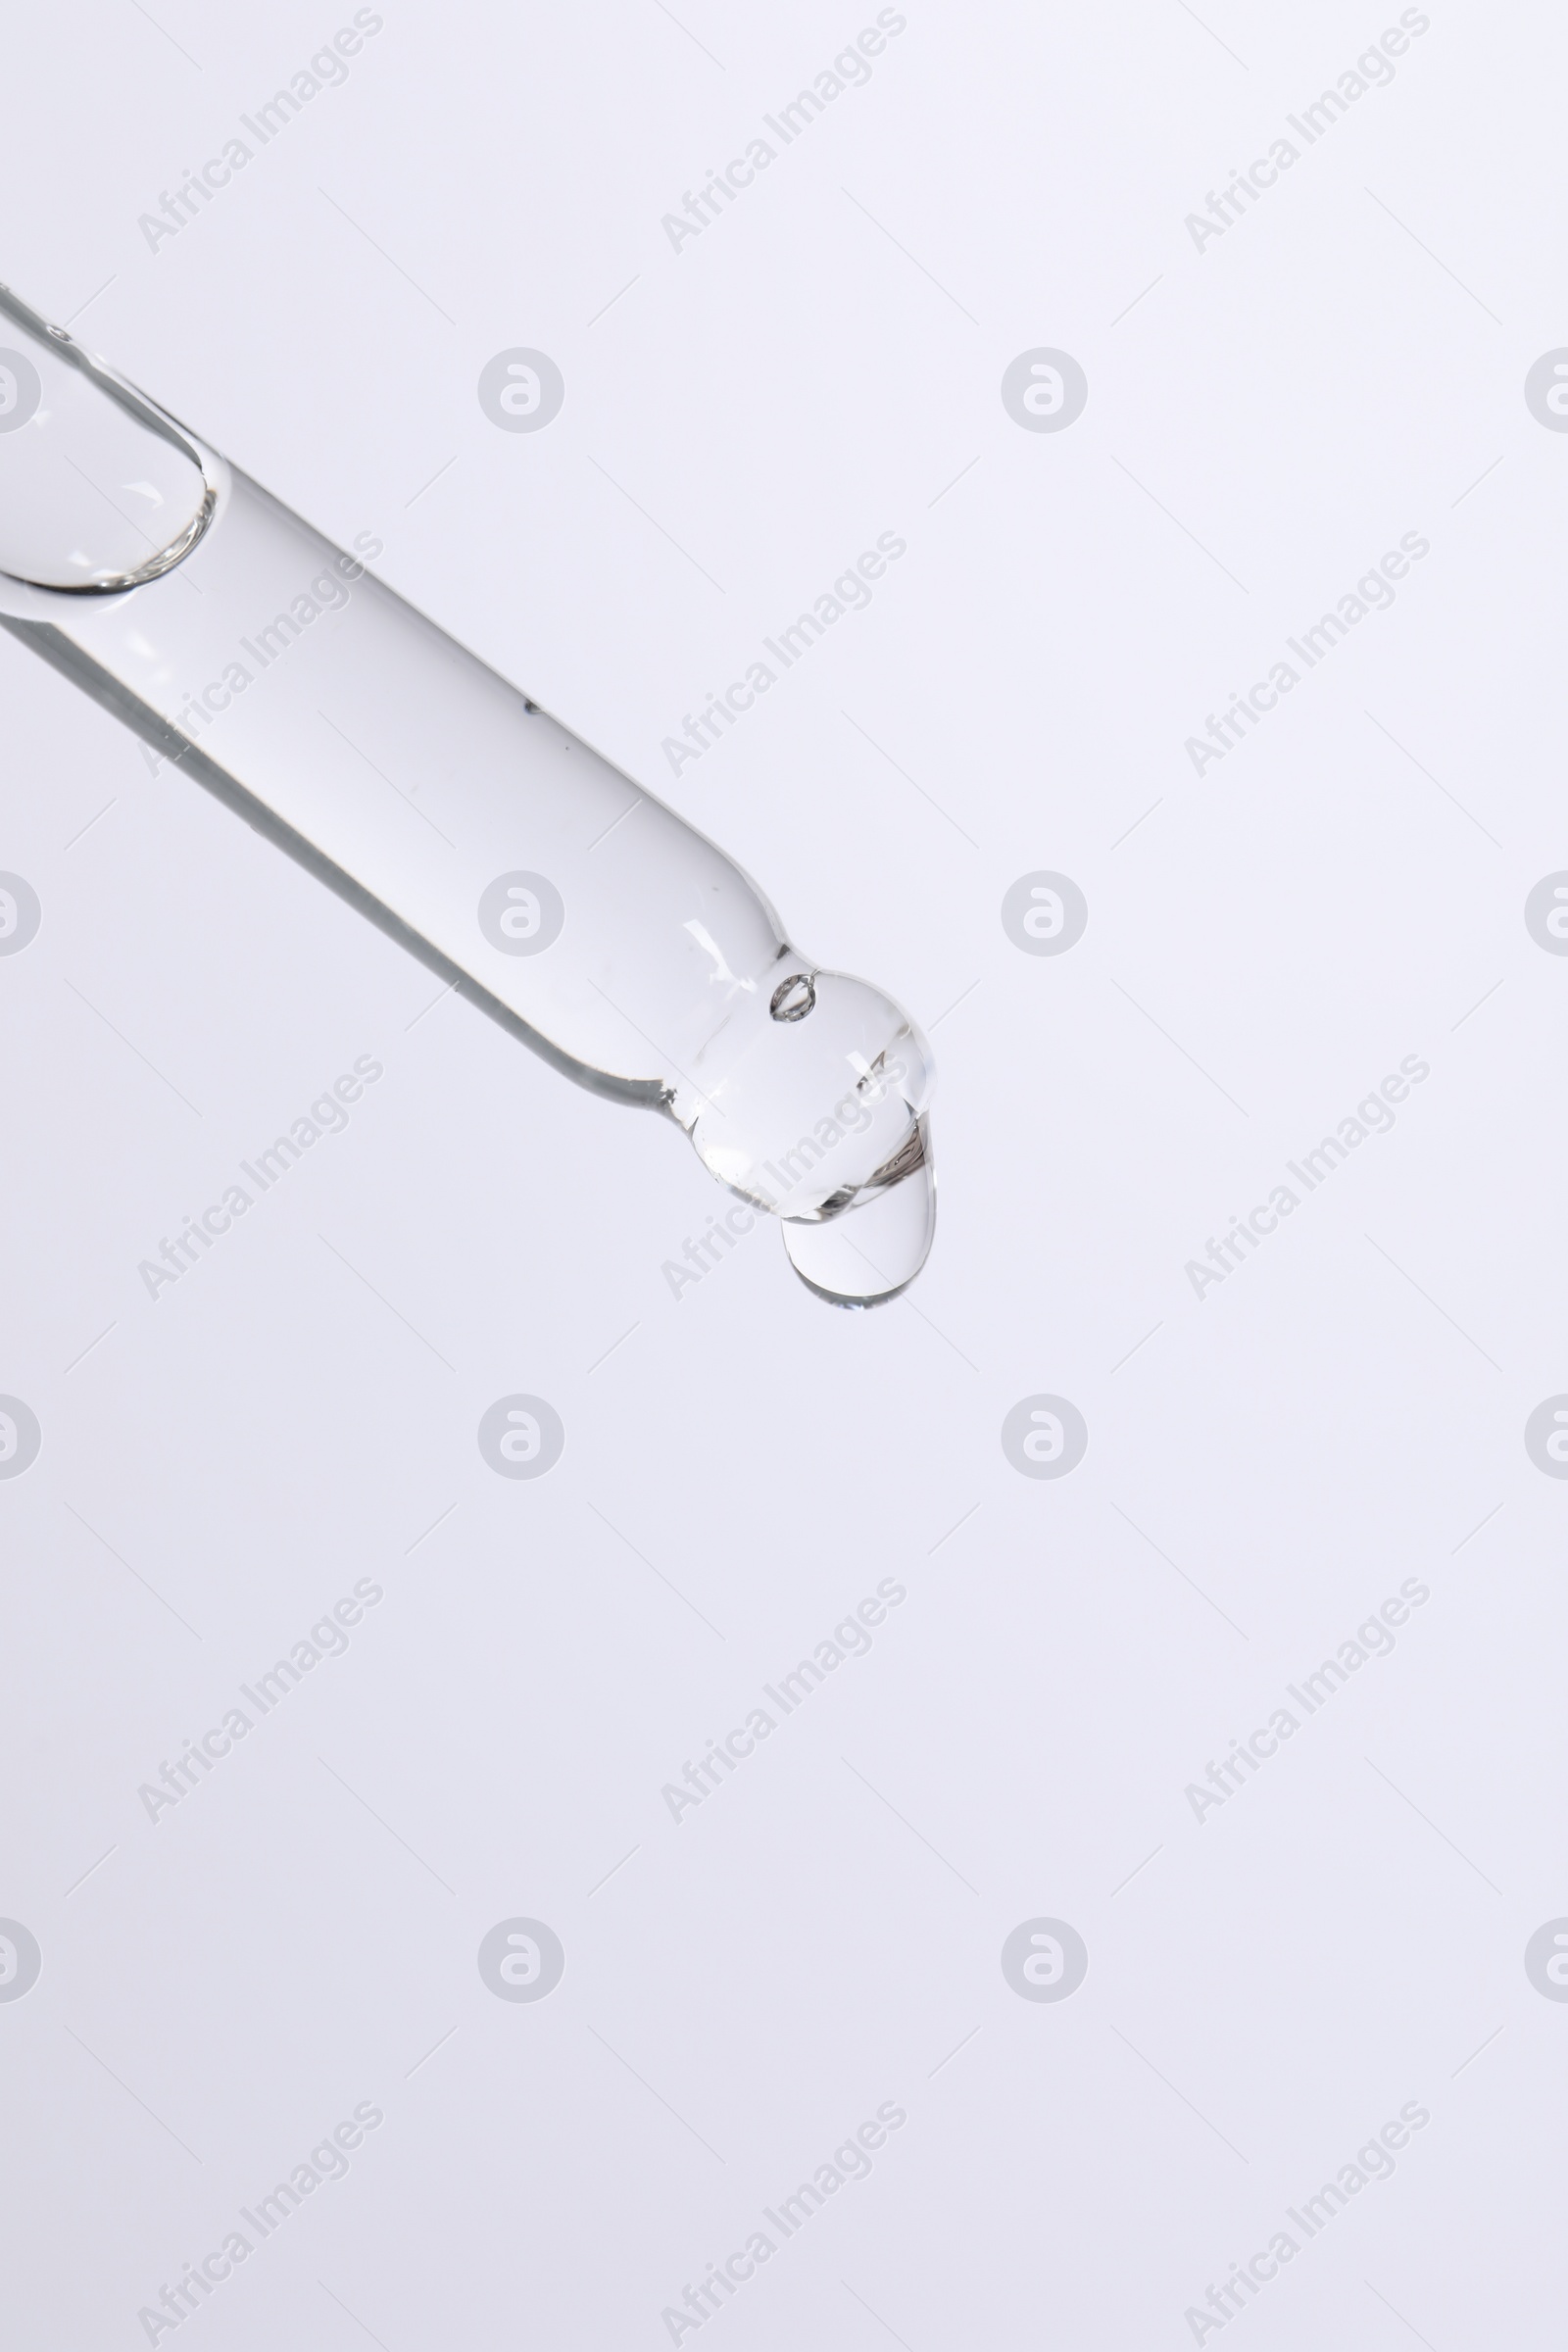 Photo of Dripping cosmetic serum from pipette on white background